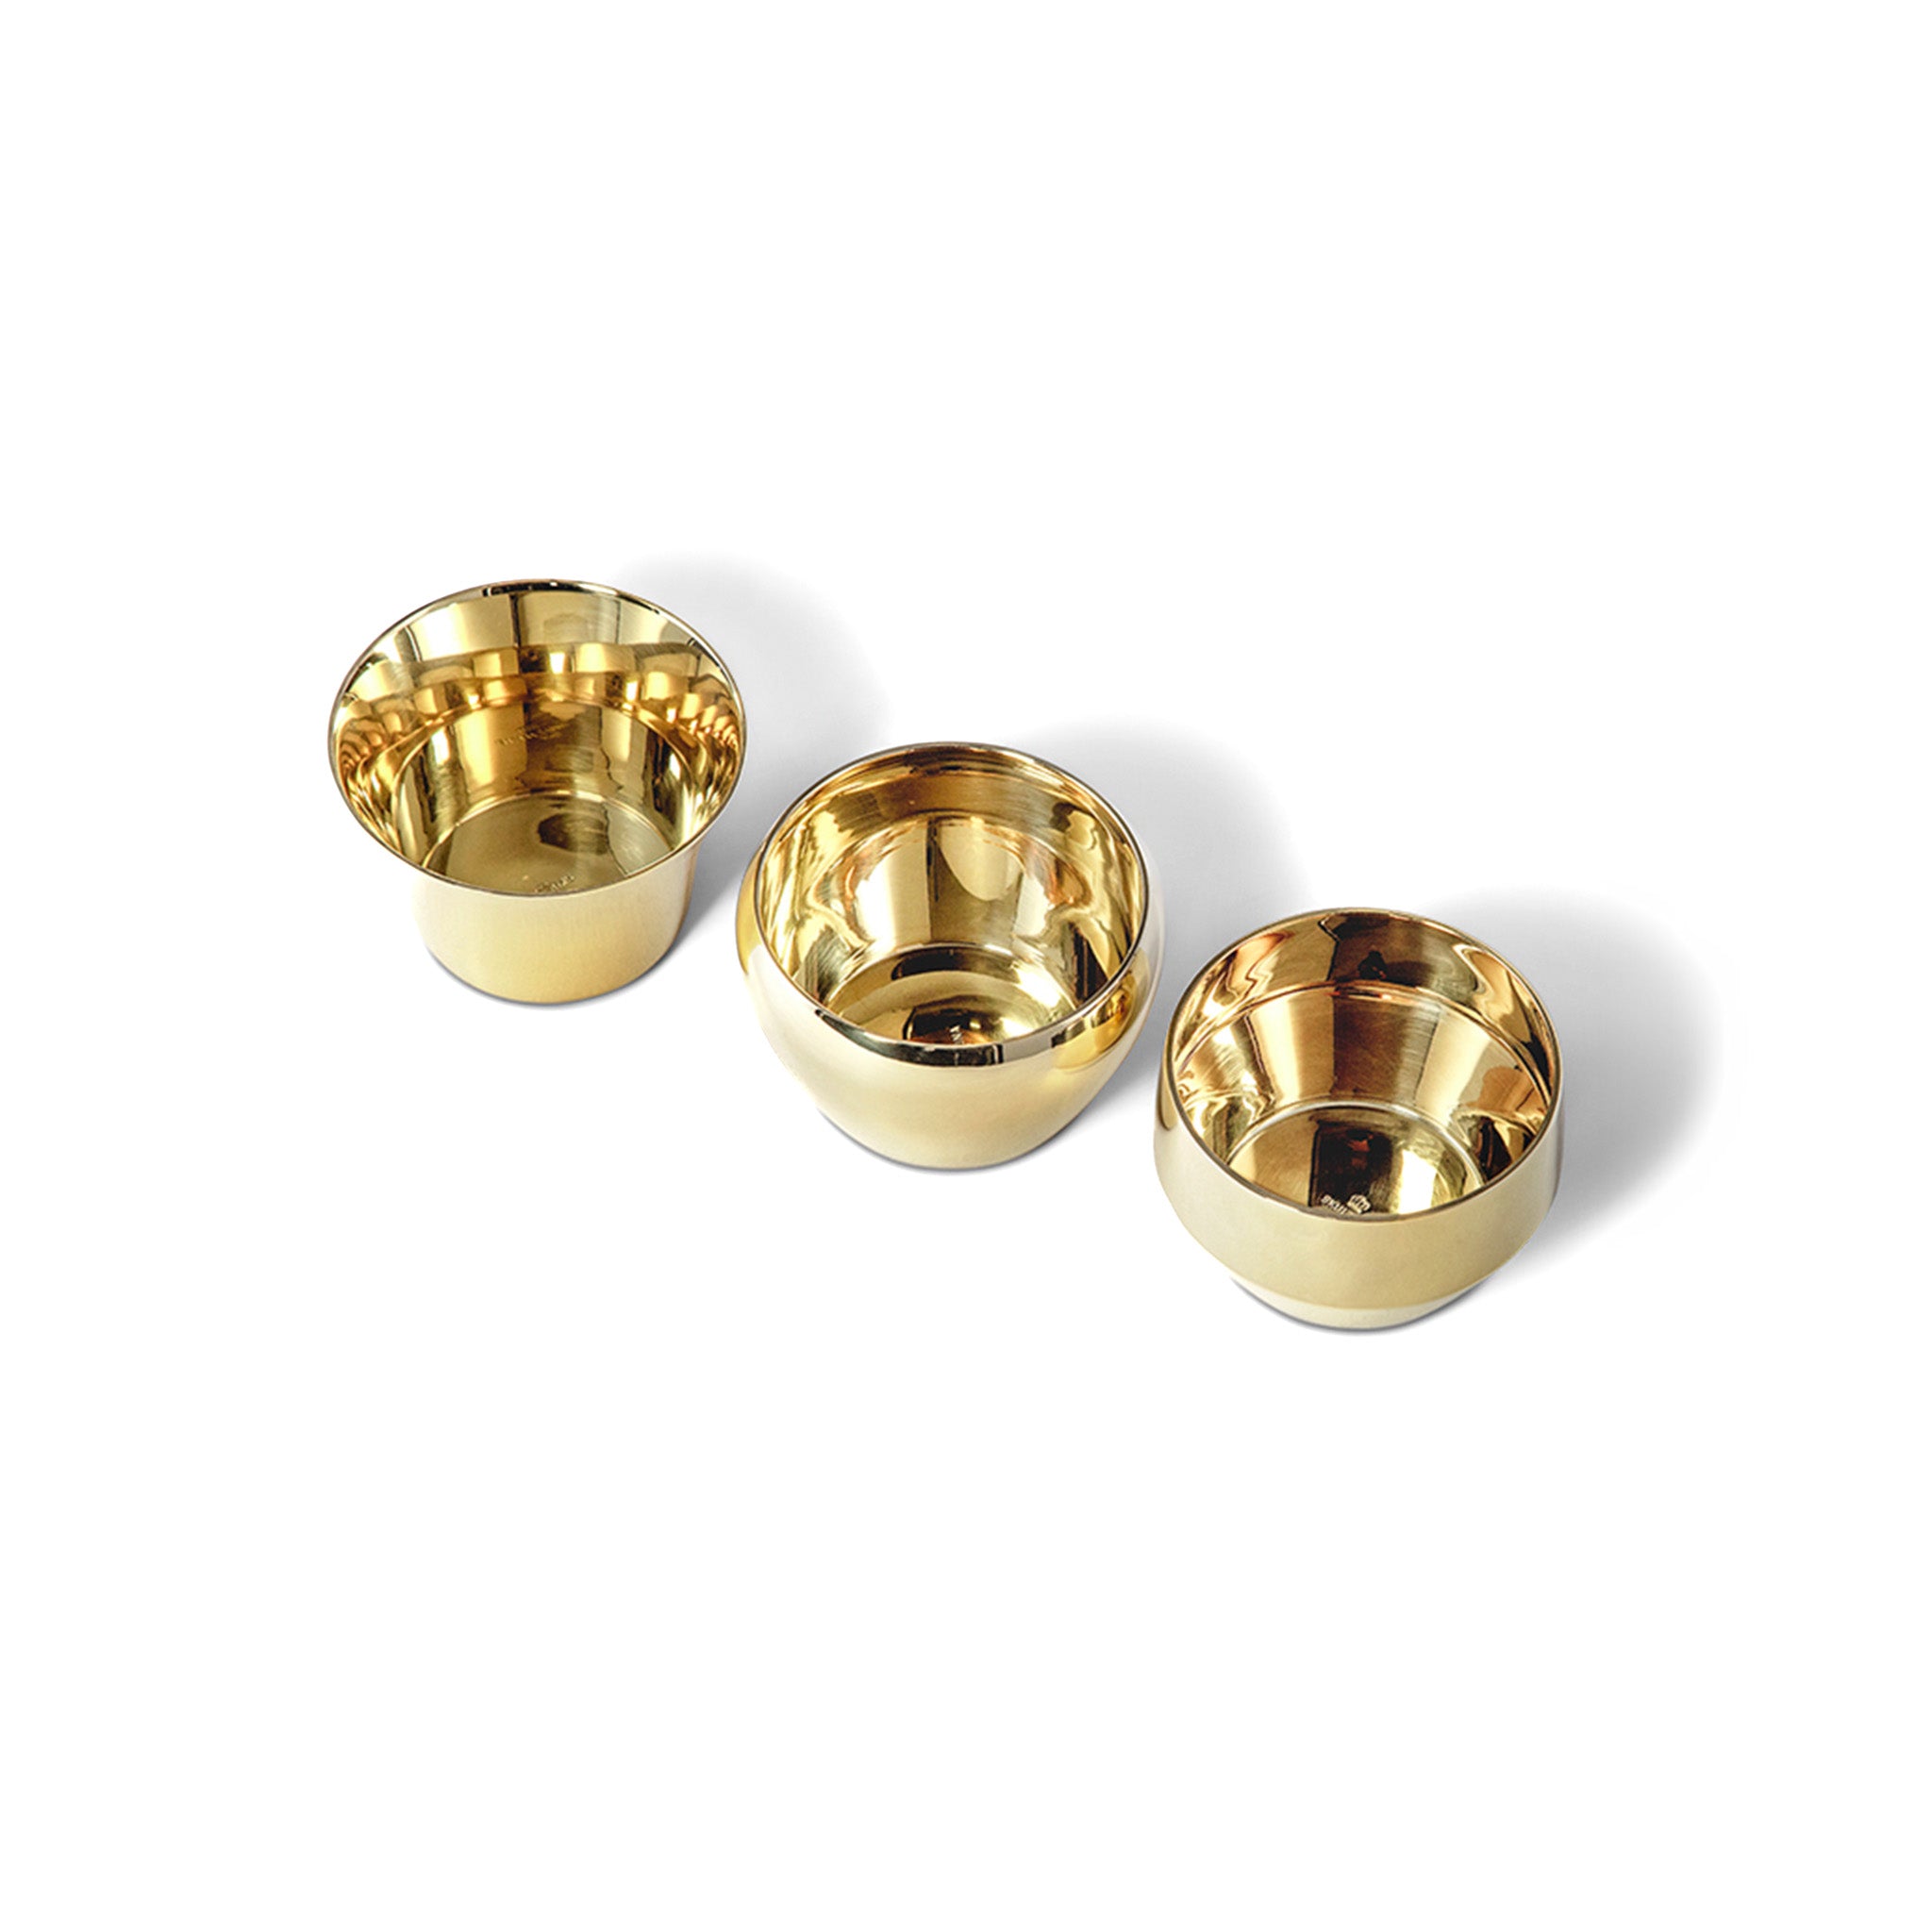 three brass tealights by skultunasitting next to each other in a top view